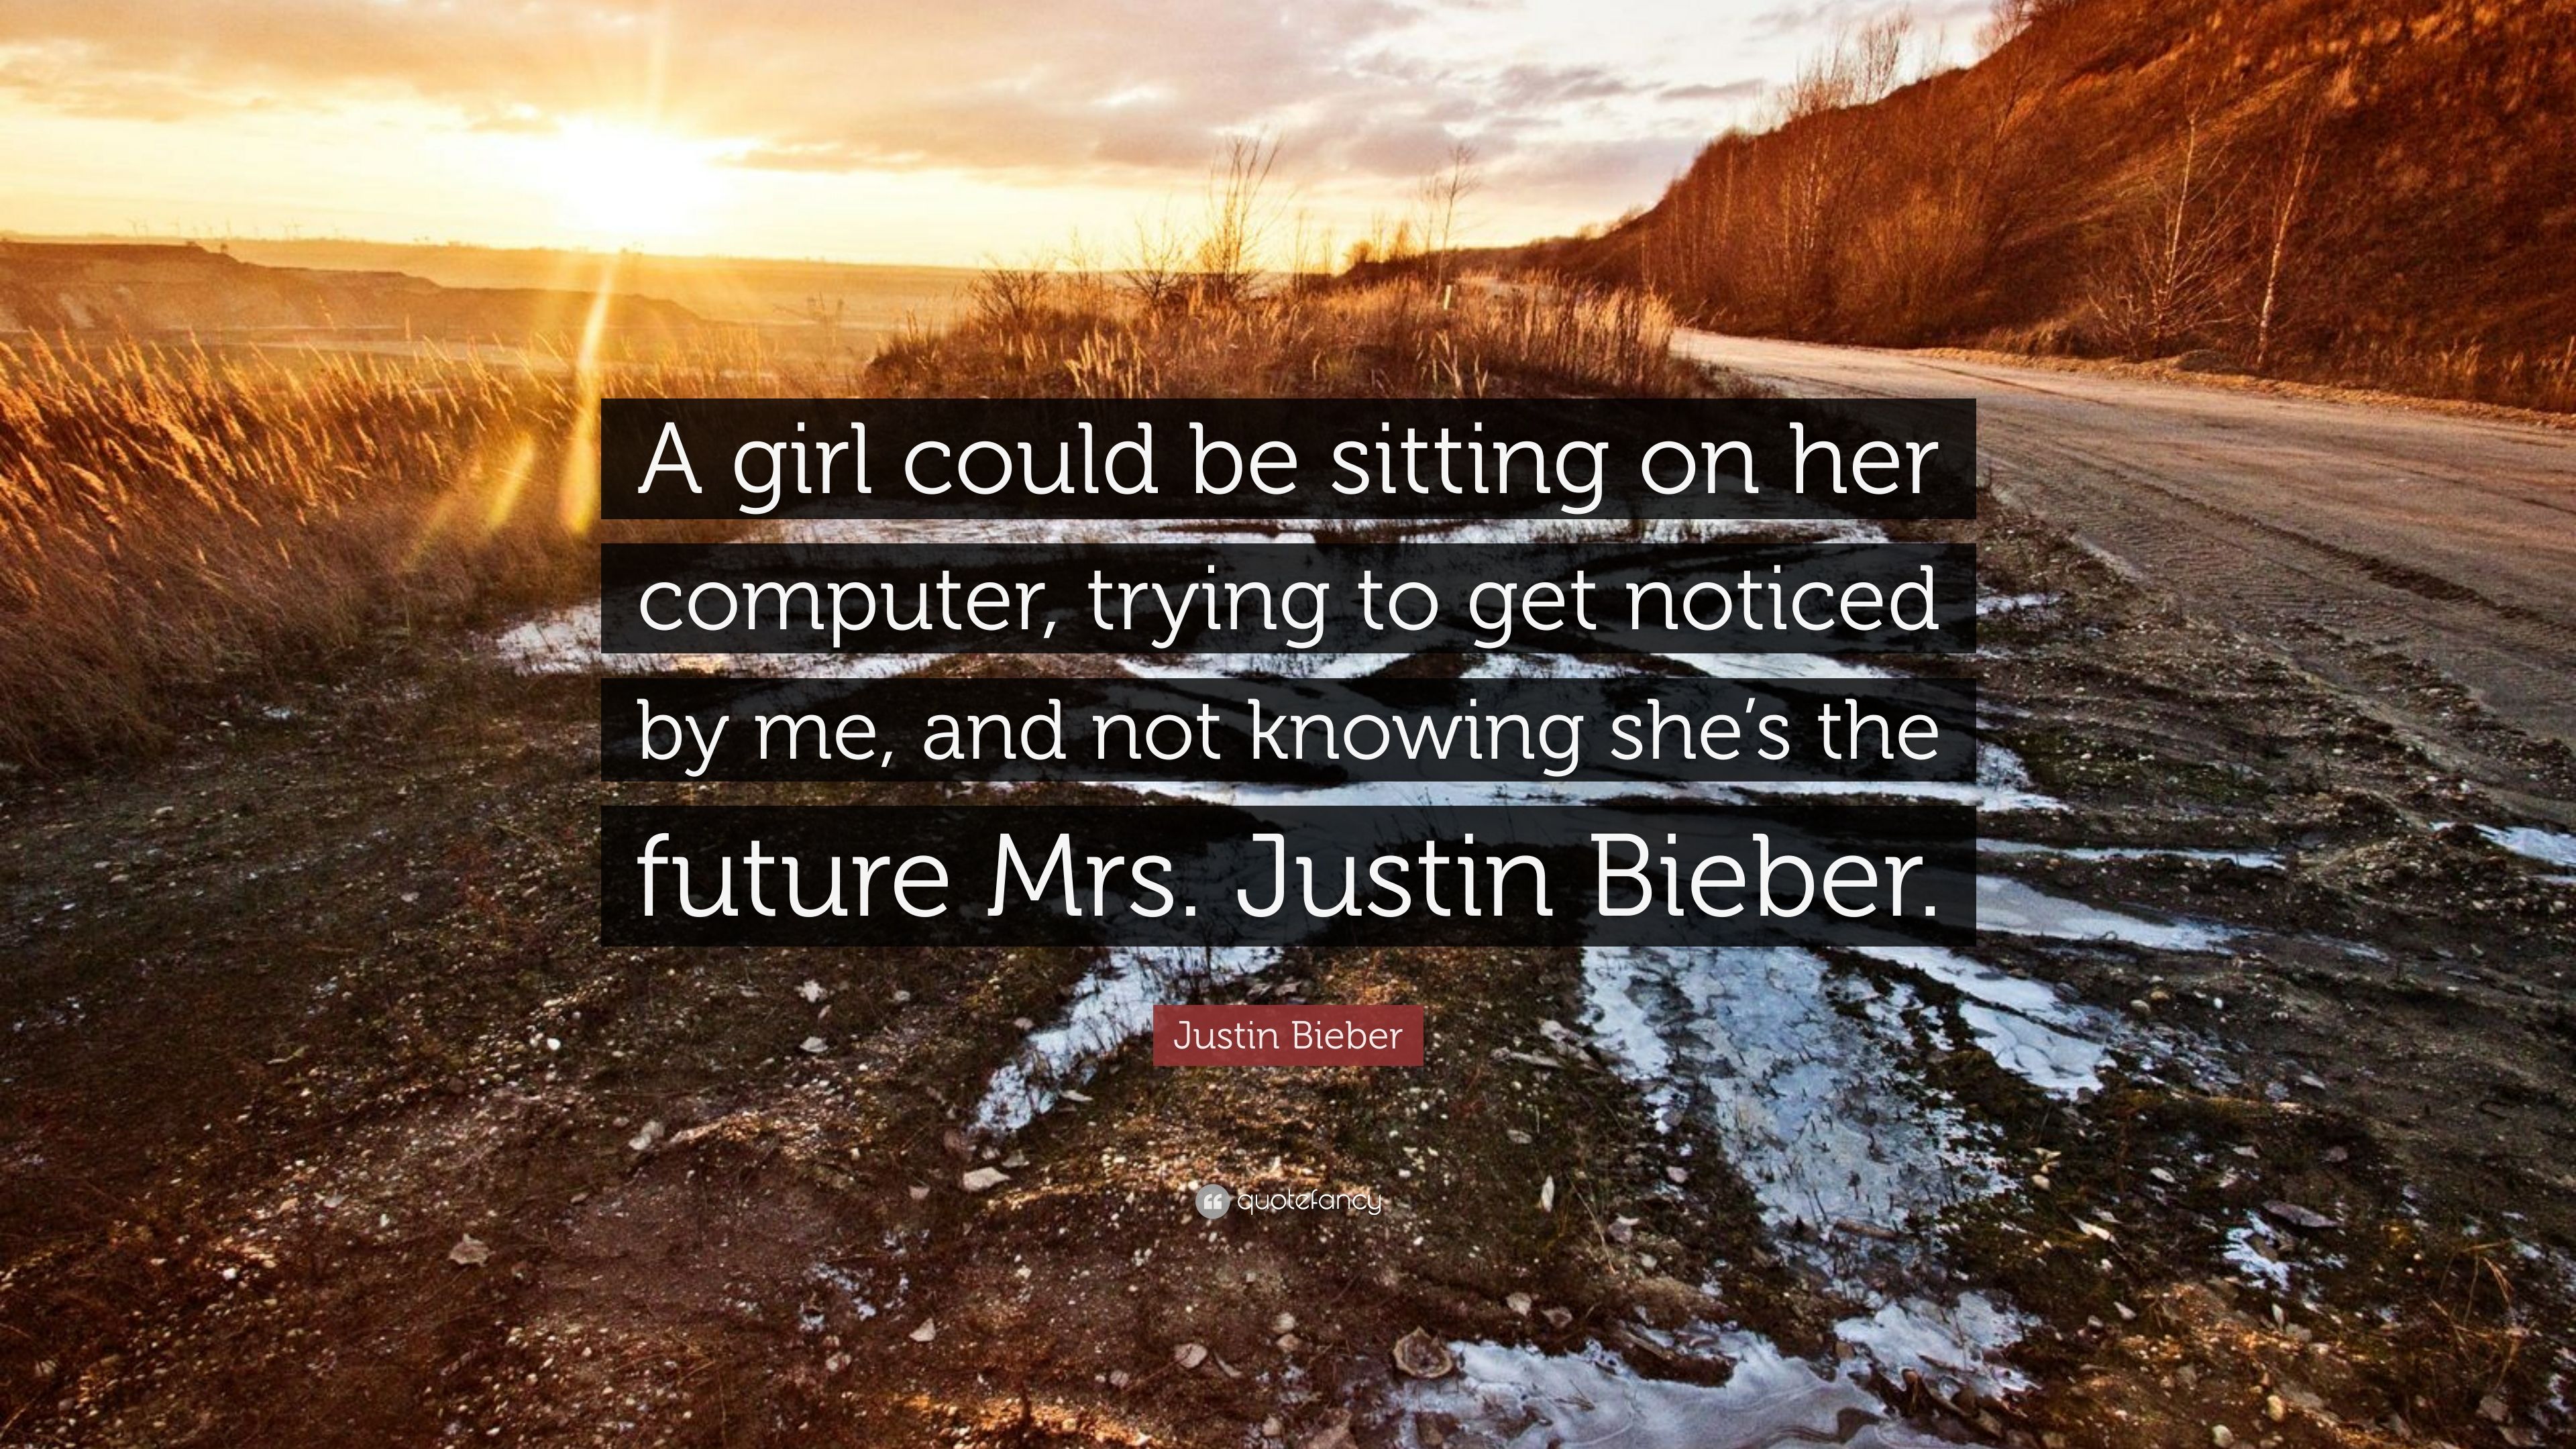 Justin Bieber Quote: “A girl could be sitting on her computer